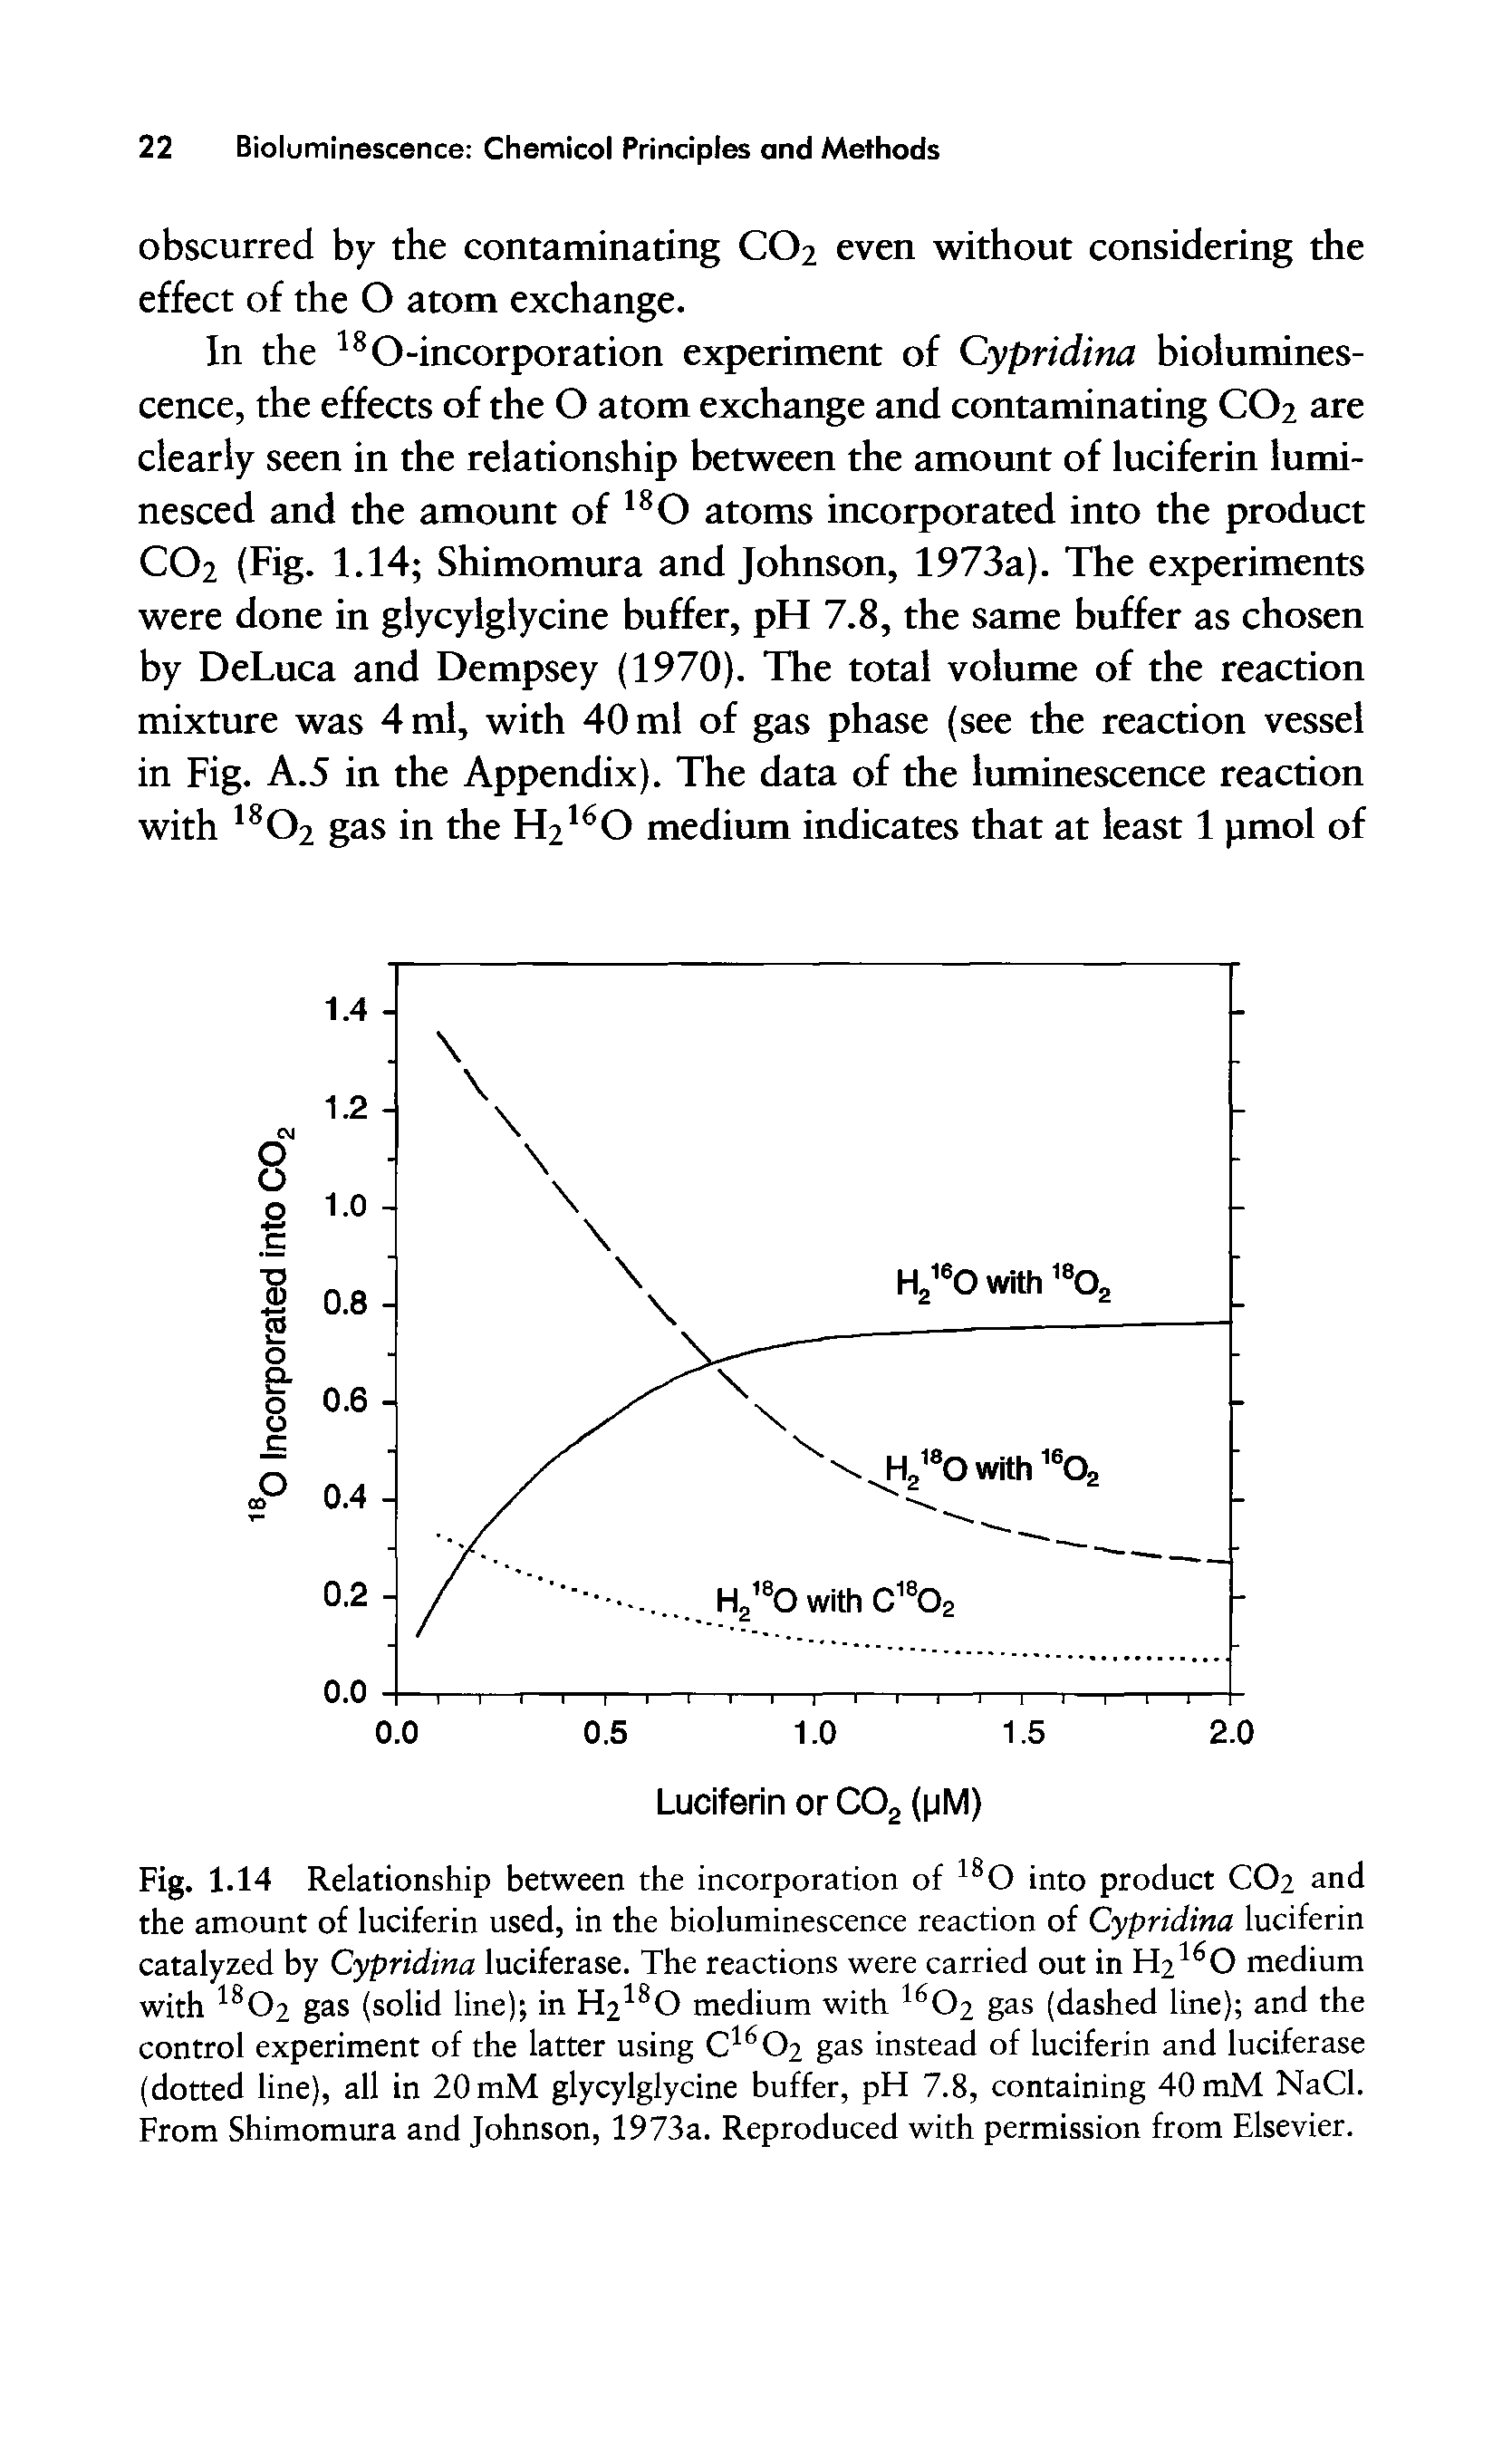 Fig. 1.14 Relationship between the incorporation of 180 into product CO2 and the amount of luciferin used, in the bioluminescence reaction of Cypridina luciferin catalyzed by Cypridina luciferase. The reactions were carried out in H2160 medium with 1802 gas (solid line) in H2lsO medium with 16C>2 gas (dashed line) and the control experiment of the latter using C16C>2 gas instead of luciferin and luciferase (dotted line), all in 20 mM glycylglycine buffer, pH 7.8, containing 40 mM NaCl. From Shimomura and Johnson, 1973a. Reproduced with permission from Elsevier.